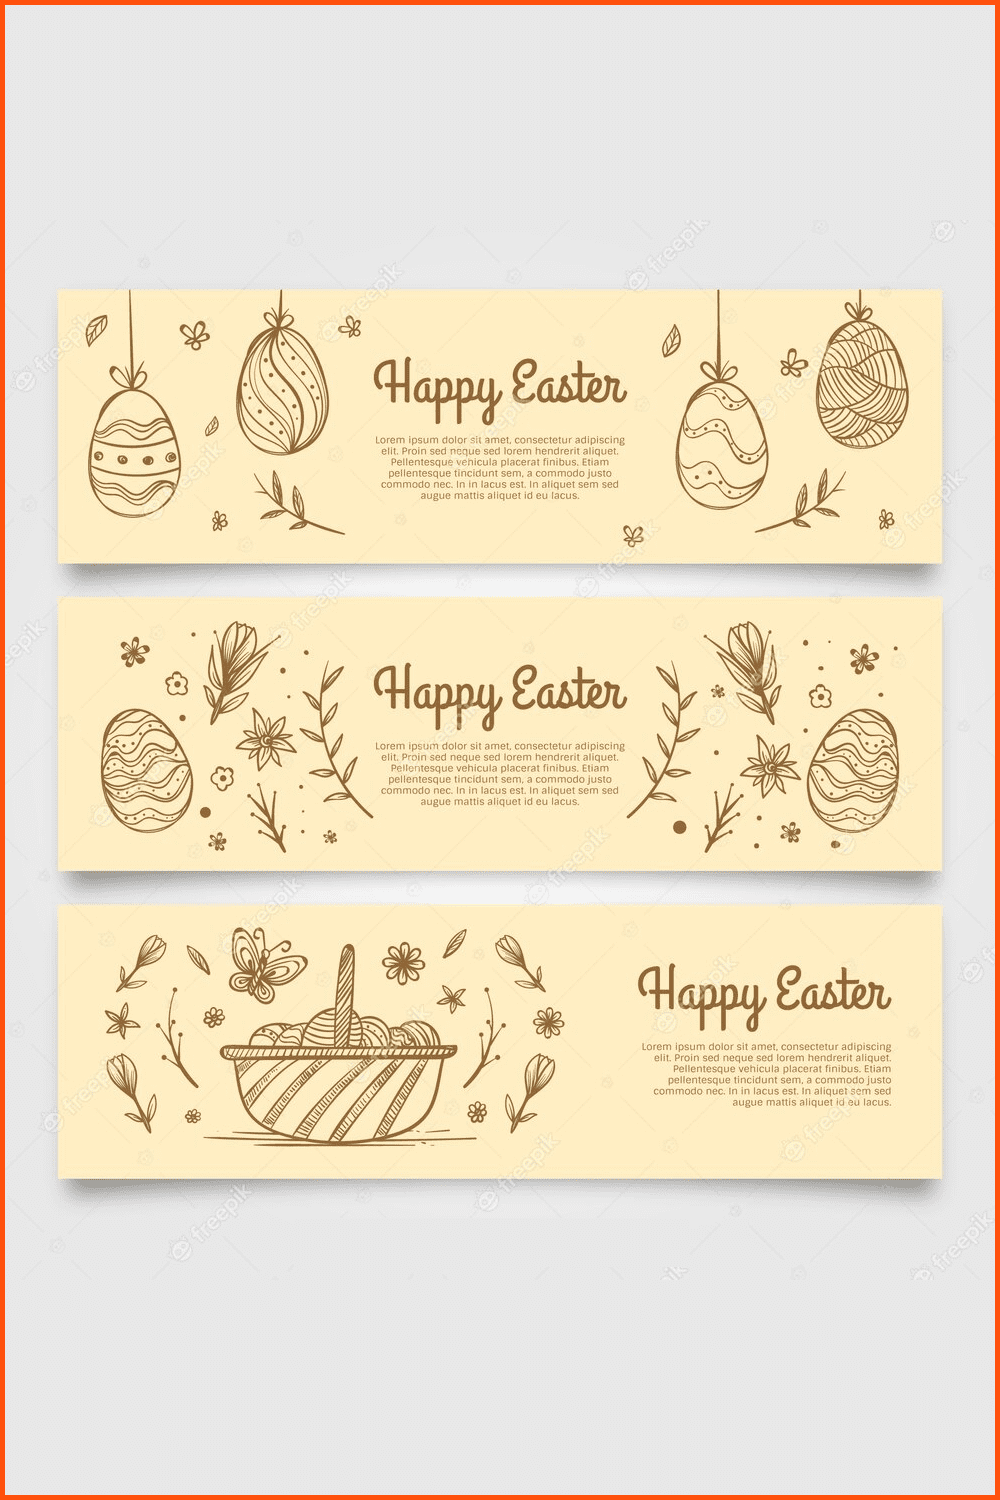 Banners sketches easter eggs.